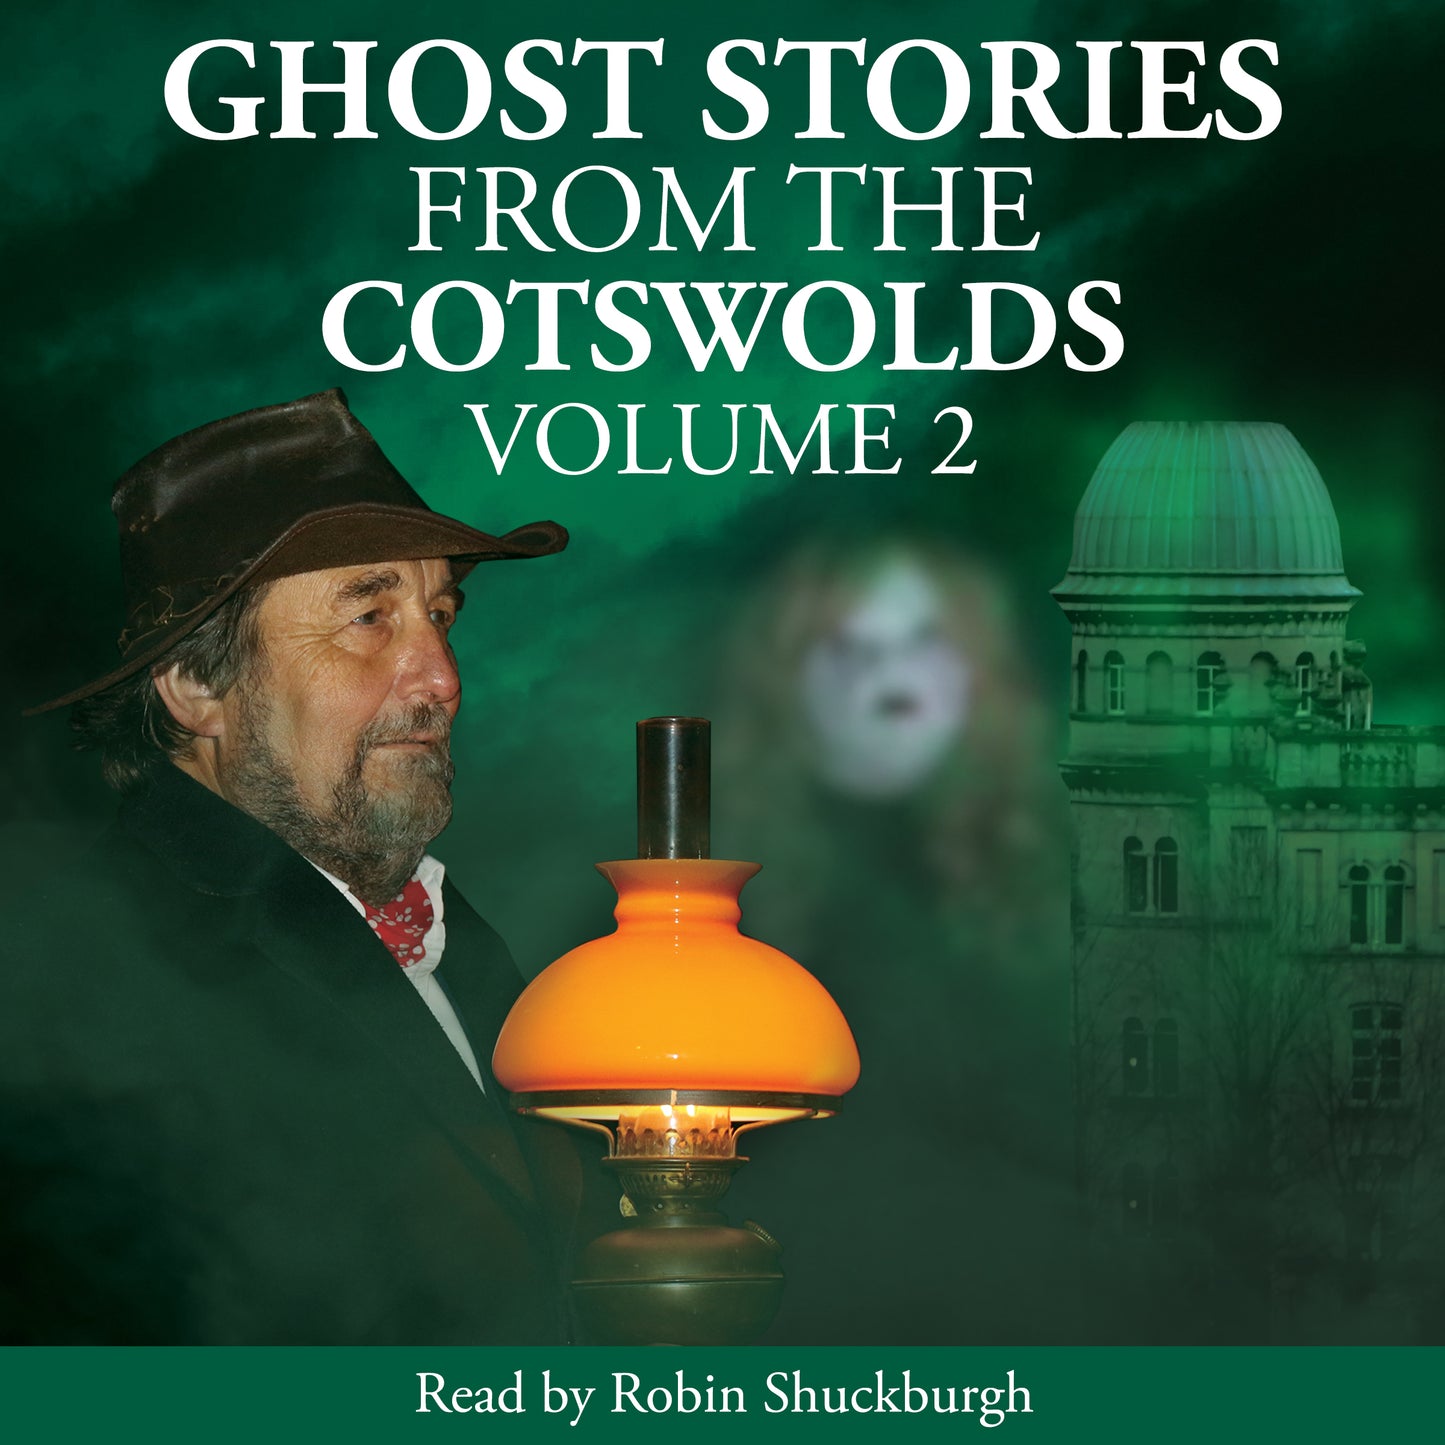 Ghost Stories from the Cotswolds Volume 2: Audiobook by Robin Shuckburgh